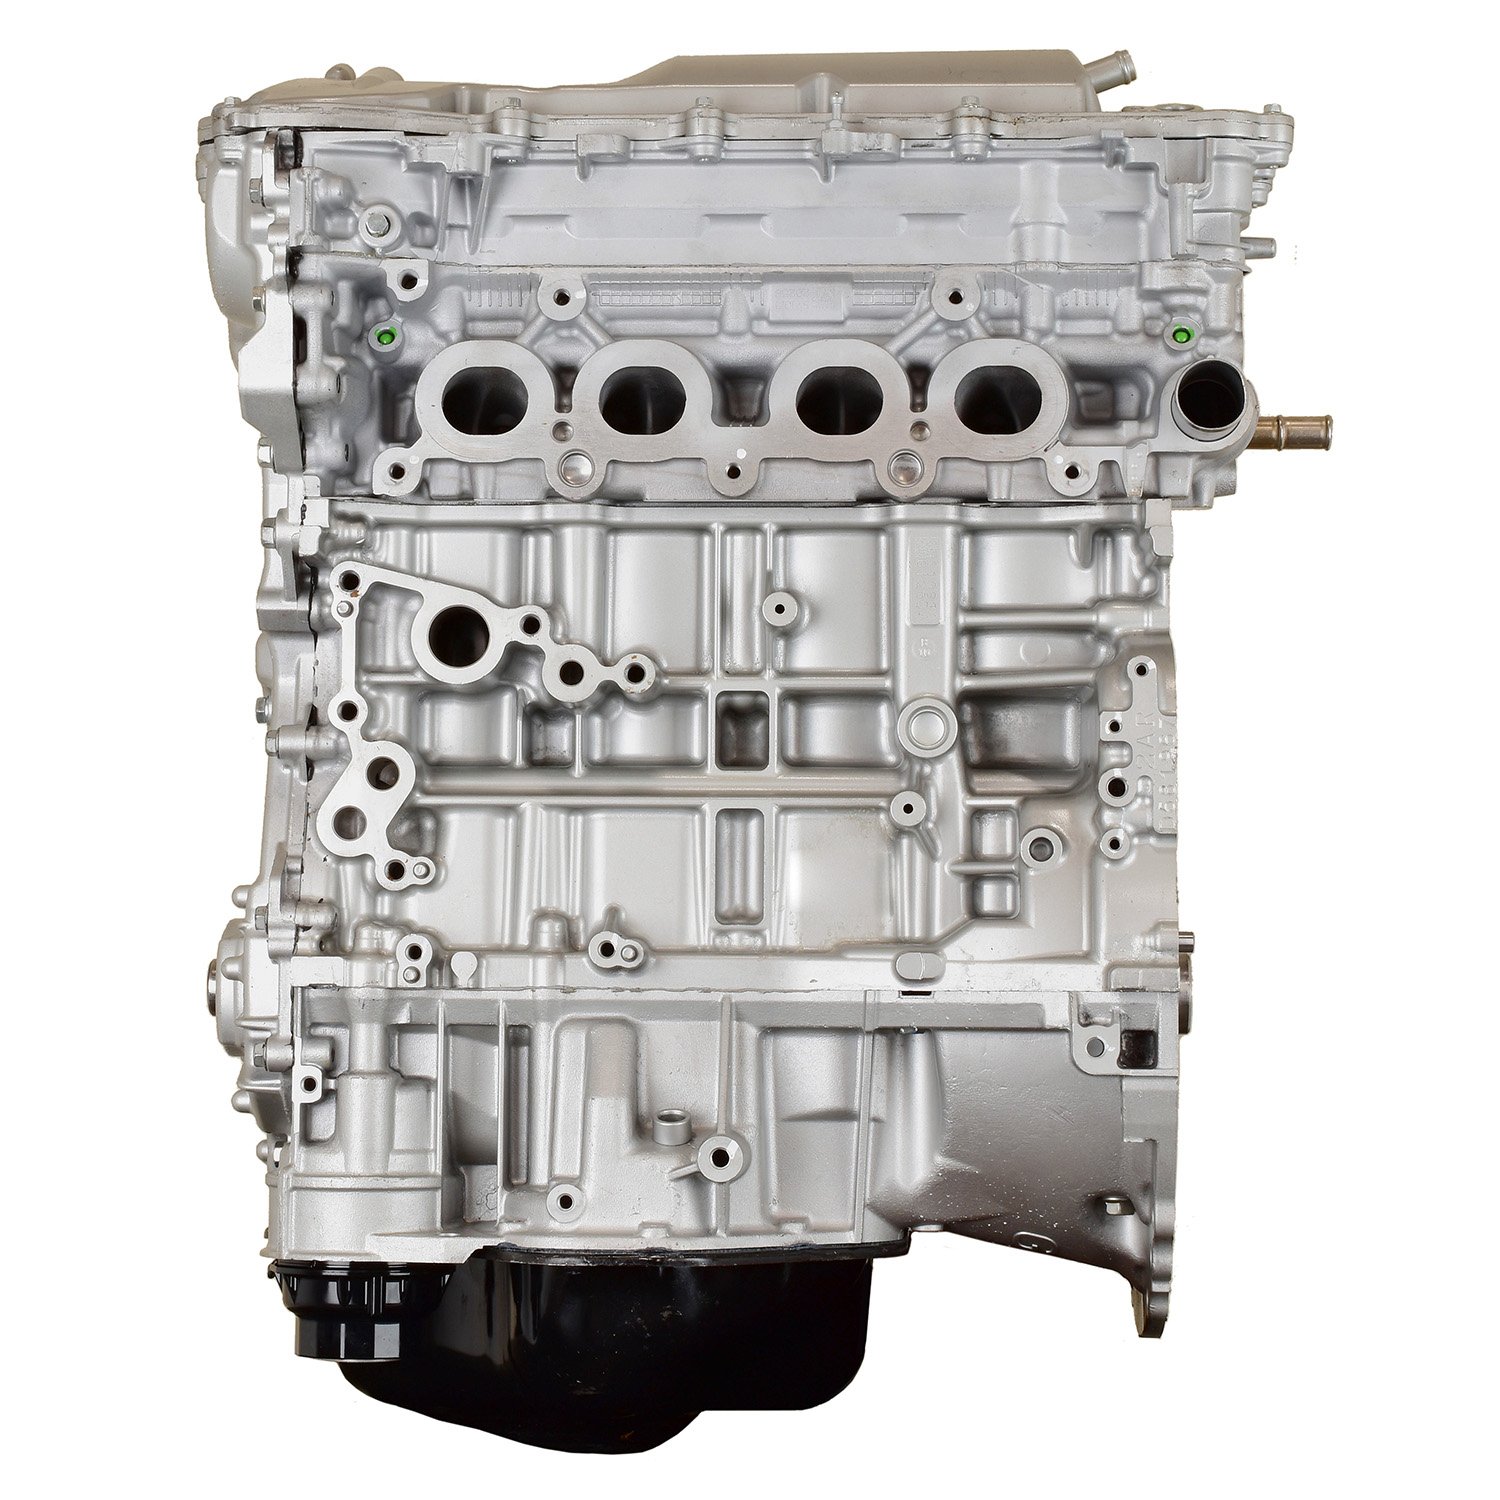 869B Remanufactured Crate Engine for 2010-2016 Toyota 2.5L 2AR-FE